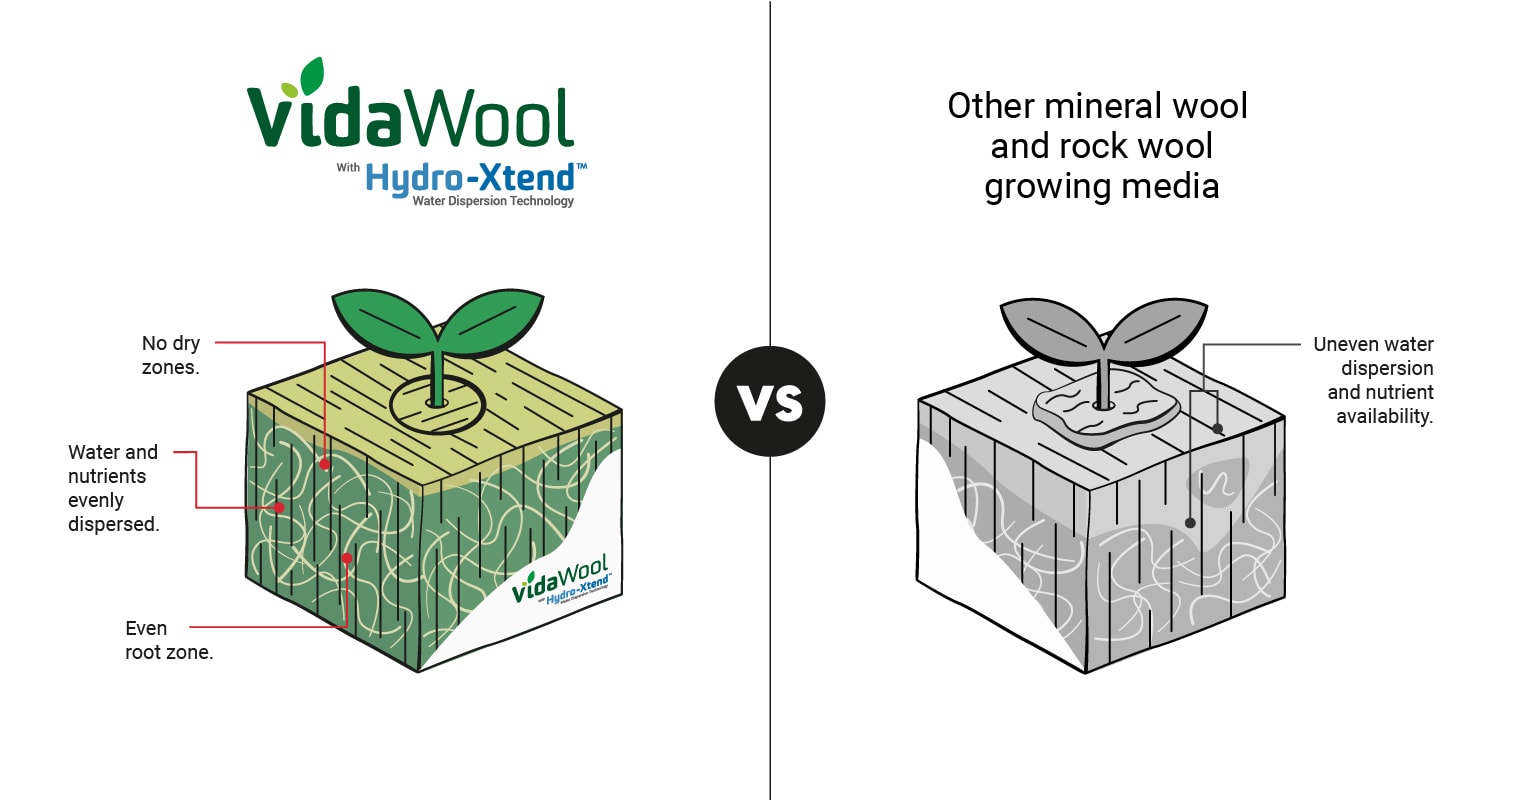 Comparison of VidaWool™ water dispersion and nutrient avilability versus other rock wool growing media.